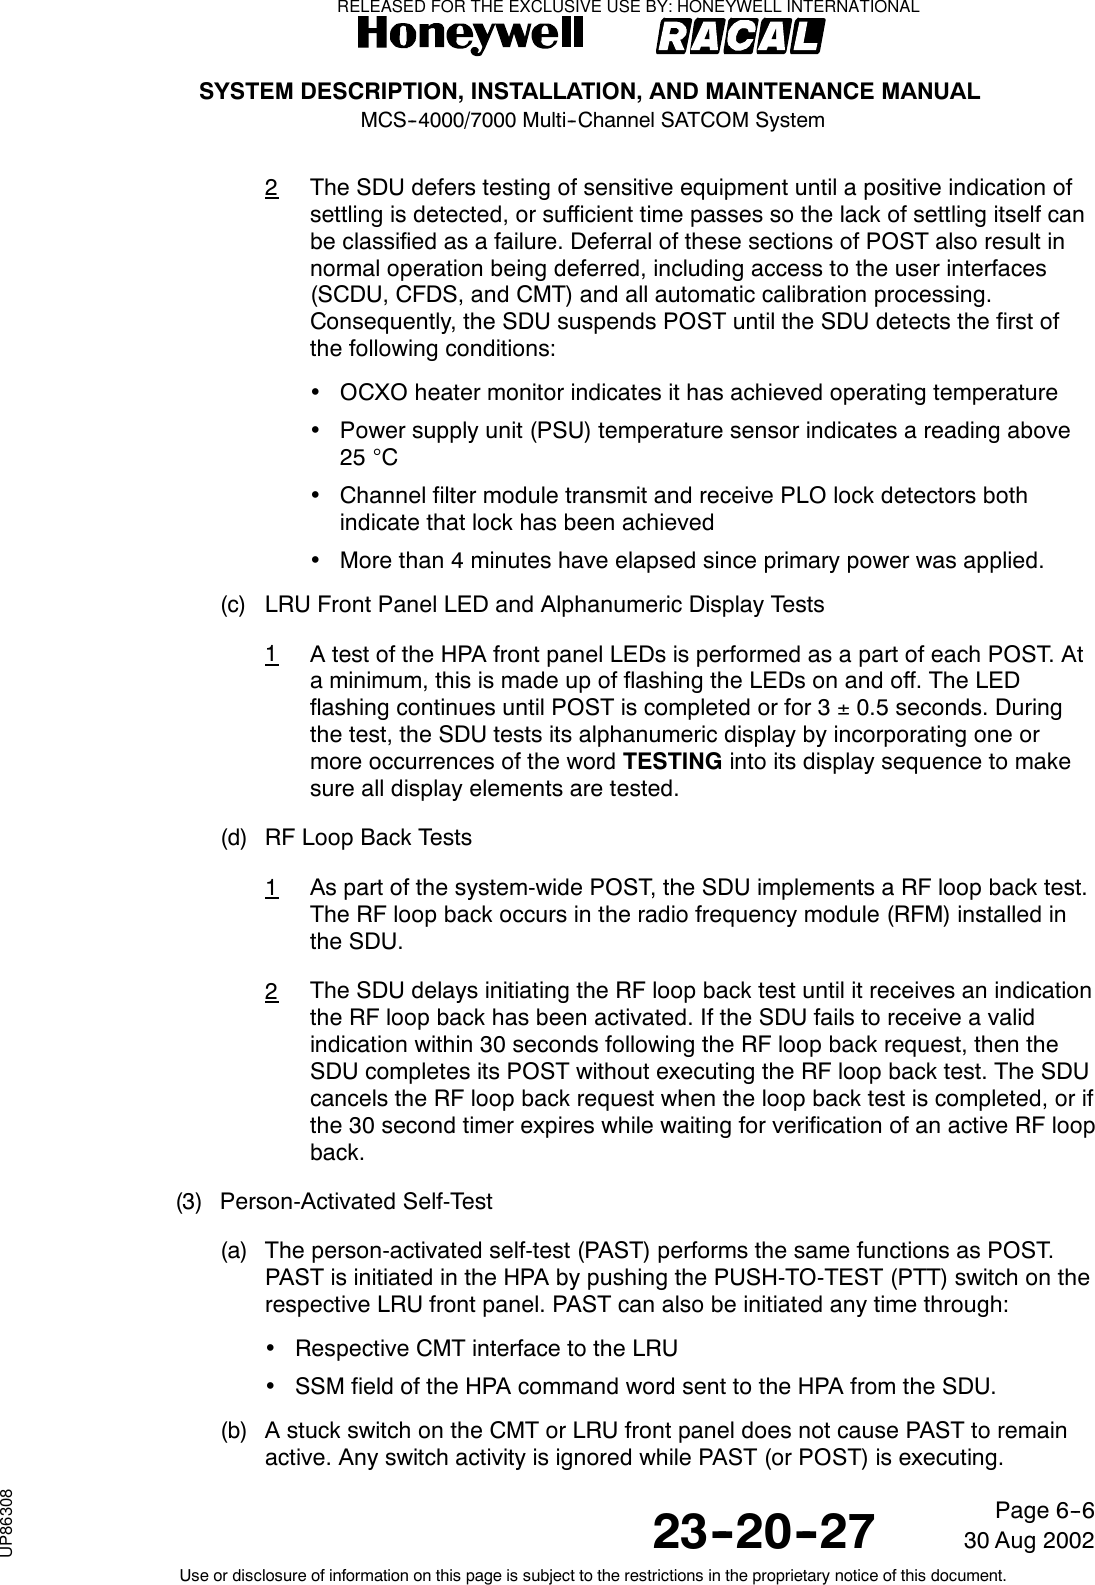 SYSTEM DESCRIPTION, INSTALLATION, AND MAINTENANCE MANUALMCS--4000/7000 Multi--Channel SATCOM System23--20--2730 Aug 2002Use or disclosure of information on this page is subject to the restrictions in the proprietary notice of this document.Page 6--62The SDU defers testing of sensitive equipment until a positive indication ofsettling is detected, or sufficient time passes so the lack of settling itself canbe classified as a failure. Deferral of these sections of POST also result innormal operation being deferred, including access to the user interfaces(SCDU, CFDS, and CMT) and all automatic calibration processing.Consequently, the SDU suspends POST until the SDU detects the first ofthe following conditions:•OCXO heater monitor indicates it has achieved operating temperature•Power supply unit (PSU) temperature sensor indicates a reading above25 °C•Channel filter module transmit and receive PLO lock detectors bothindicate that lock has been achieved•More than 4 minutes have elapsed since primary power was applied.(c) LRU Front Panel LED and Alphanumeric Display Tests1A test of the HPA front panel LEDs is performed as a part of each POST. Ata minimum, this is made up of flashing the LEDs on and off. The LEDflashing continues until POST is completed or for 3 ±0.5 seconds. Duringthe test, the SDU tests its alphanumeric display by incorporating one ormore occurrences of the word TESTING into its display sequence to makesure all display elements are tested.(d) RF Loop Back Tests1As part of the system-wide POST, the SDU implements a RF loop back test.The RF loop back occurs in the radio frequency module (RFM) installed inthe SDU.2The SDU delays initiating the RF loop back test until it receives an indicationthe RF loop back has been activated. If the SDU fails to receive a validindication within 30 seconds following the RF loop back request, then theSDU completes its POST without executing the RF loop back test. The SDUcancels the RF loop back request when the loop back test is completed, or ifthe 30 second timer expires while waiting for verification of an active RF loopback.(3) Person-Activated Self-Test(a) The person-activated self-test (PAST) performs the same functions as POST.PAST is initiated in the HPA by pushing the PUSH-TO-TEST (PTT) switch on therespective LRU front panel. PAST can also be initiated any time through:•Respective CMT interface to the LRU•SSM field of the HPA command word sent to the HPA from the SDU.(b) A stuck switch on the CMT or LRU front panel does not cause PAST to remainactive. Any switch activity is ignored while PAST (or POST) is executing.RELEASED FOR THE EXCLUSIVE USE BY: HONEYWELL INTERNATIONALUP86308